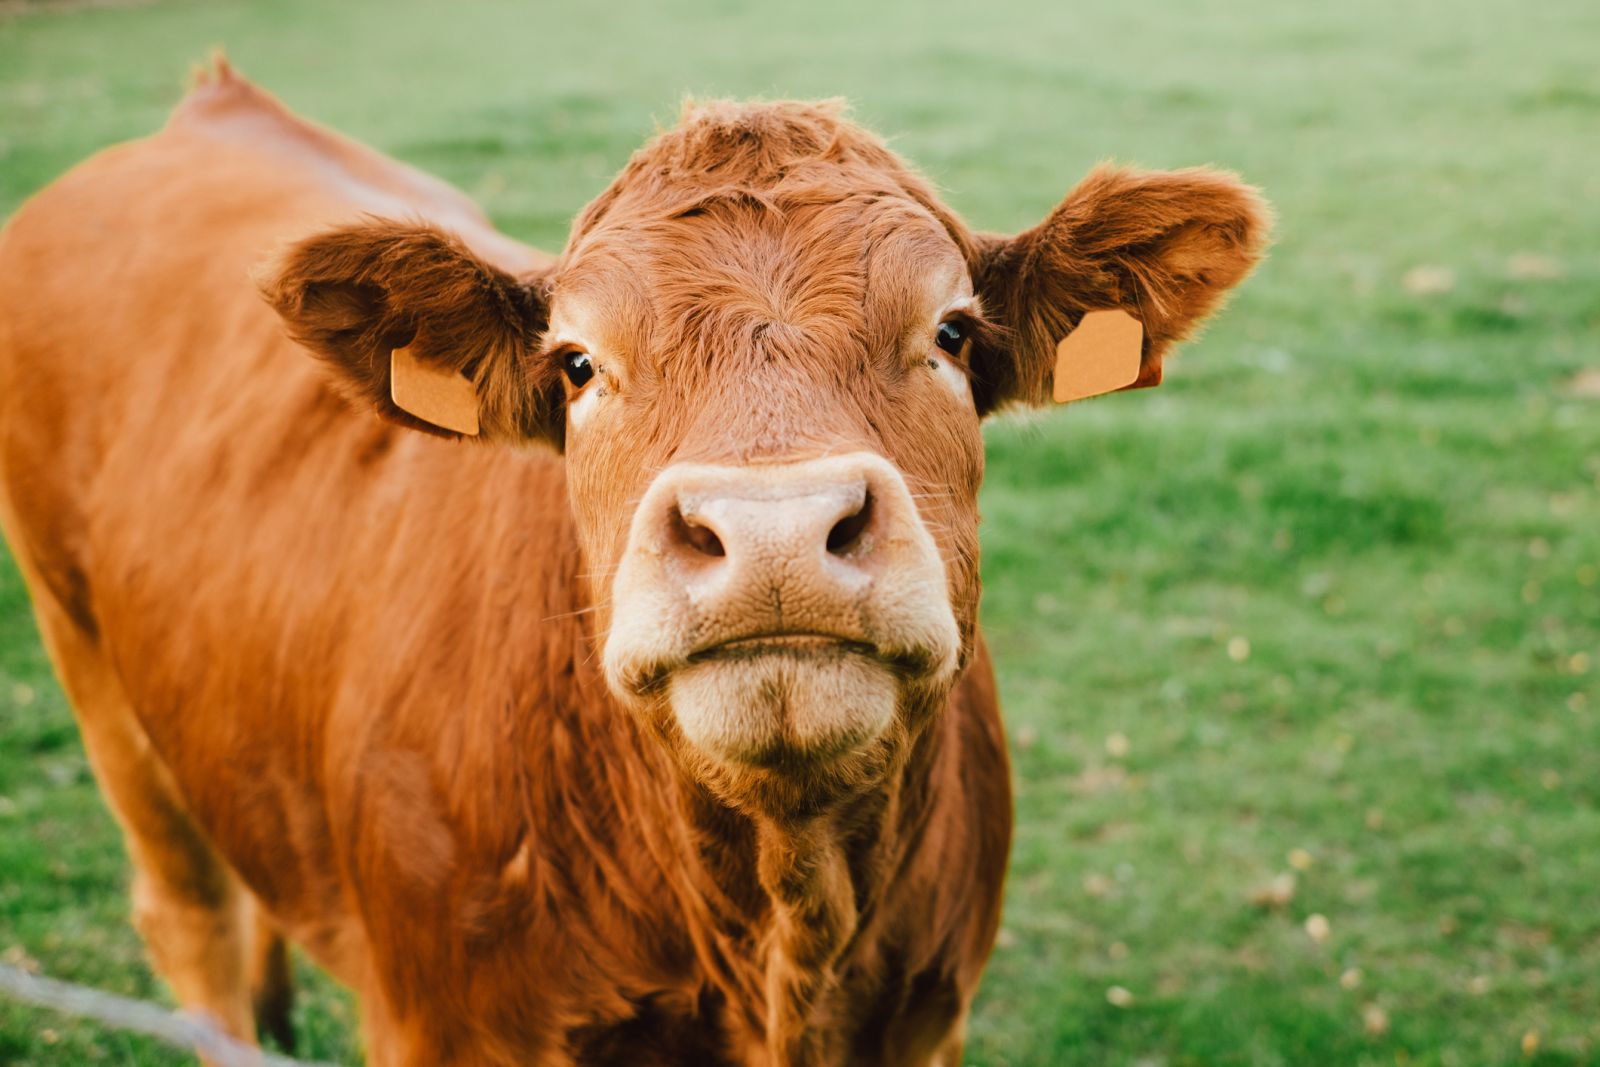 Cattle & Beef - Angus cow by Jeremy Stenuit via iStock